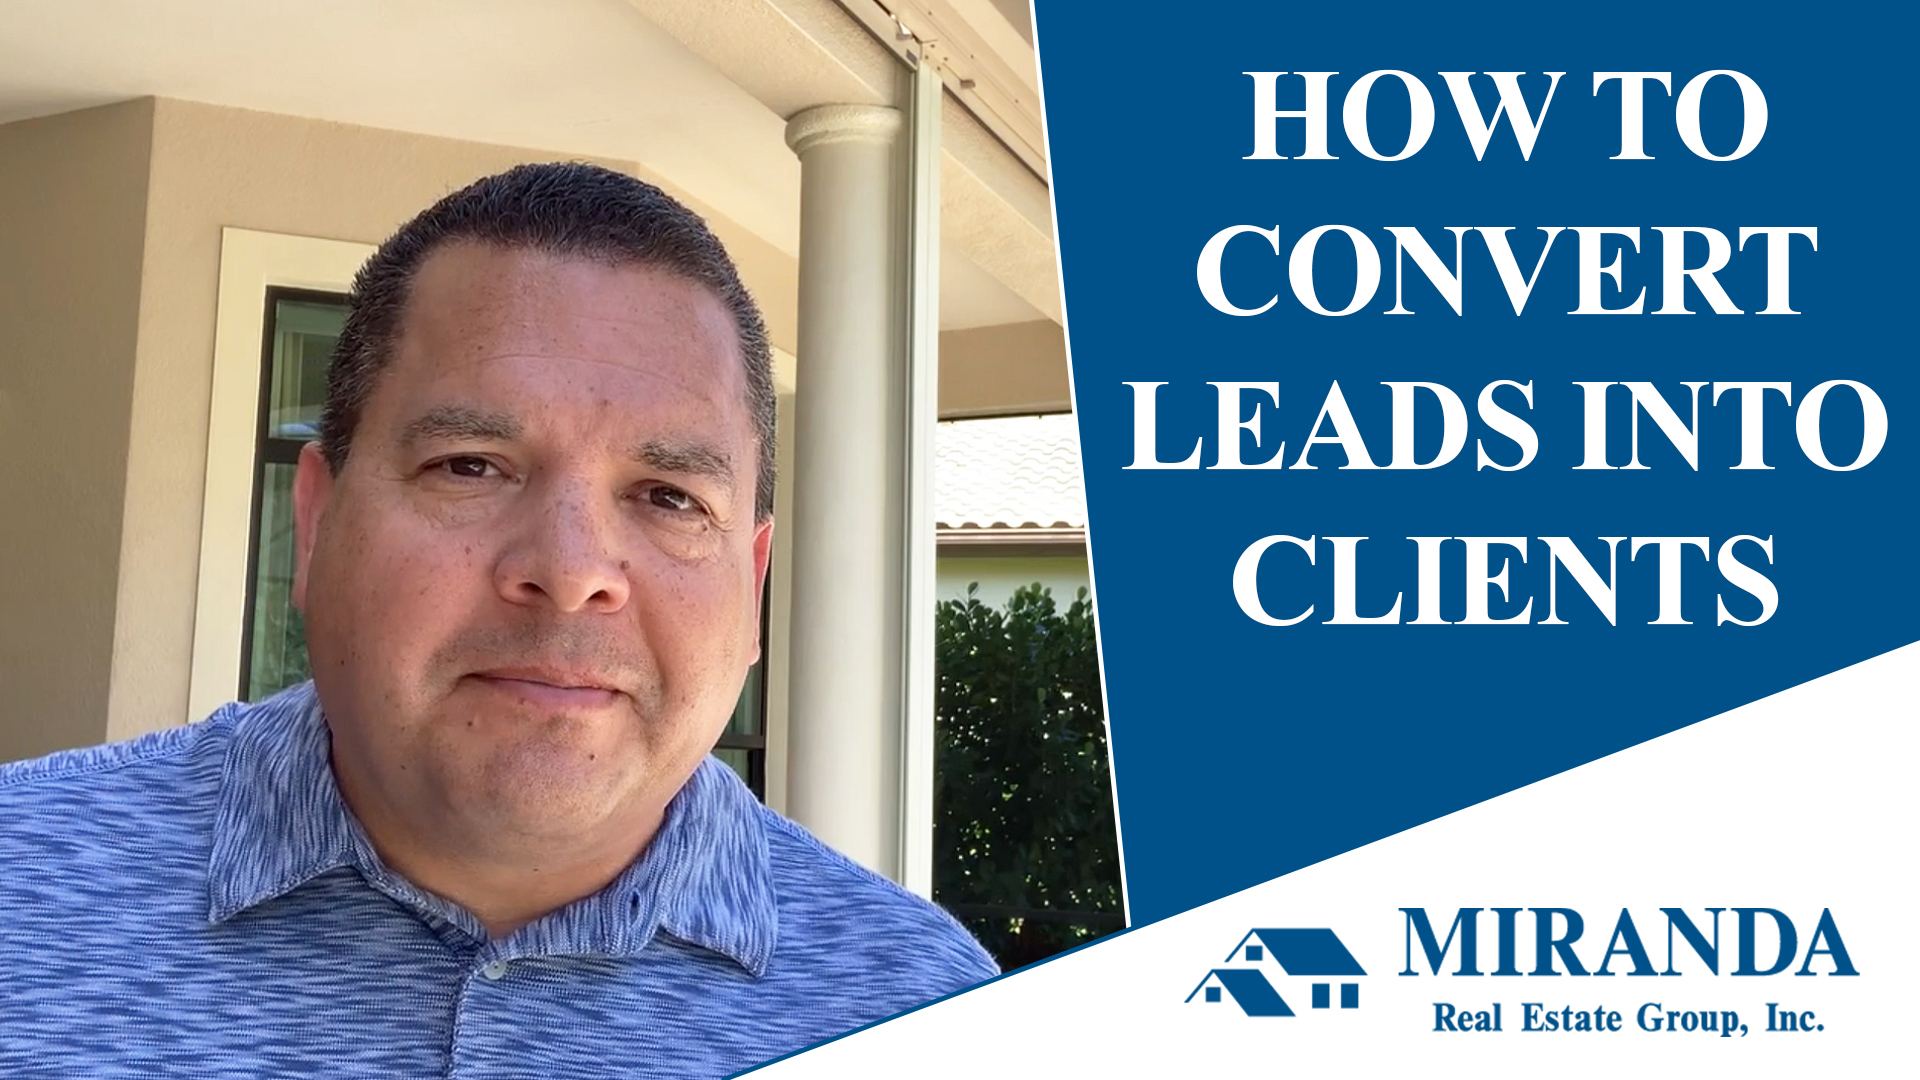 6 Steps to Convert Leads Into Clients